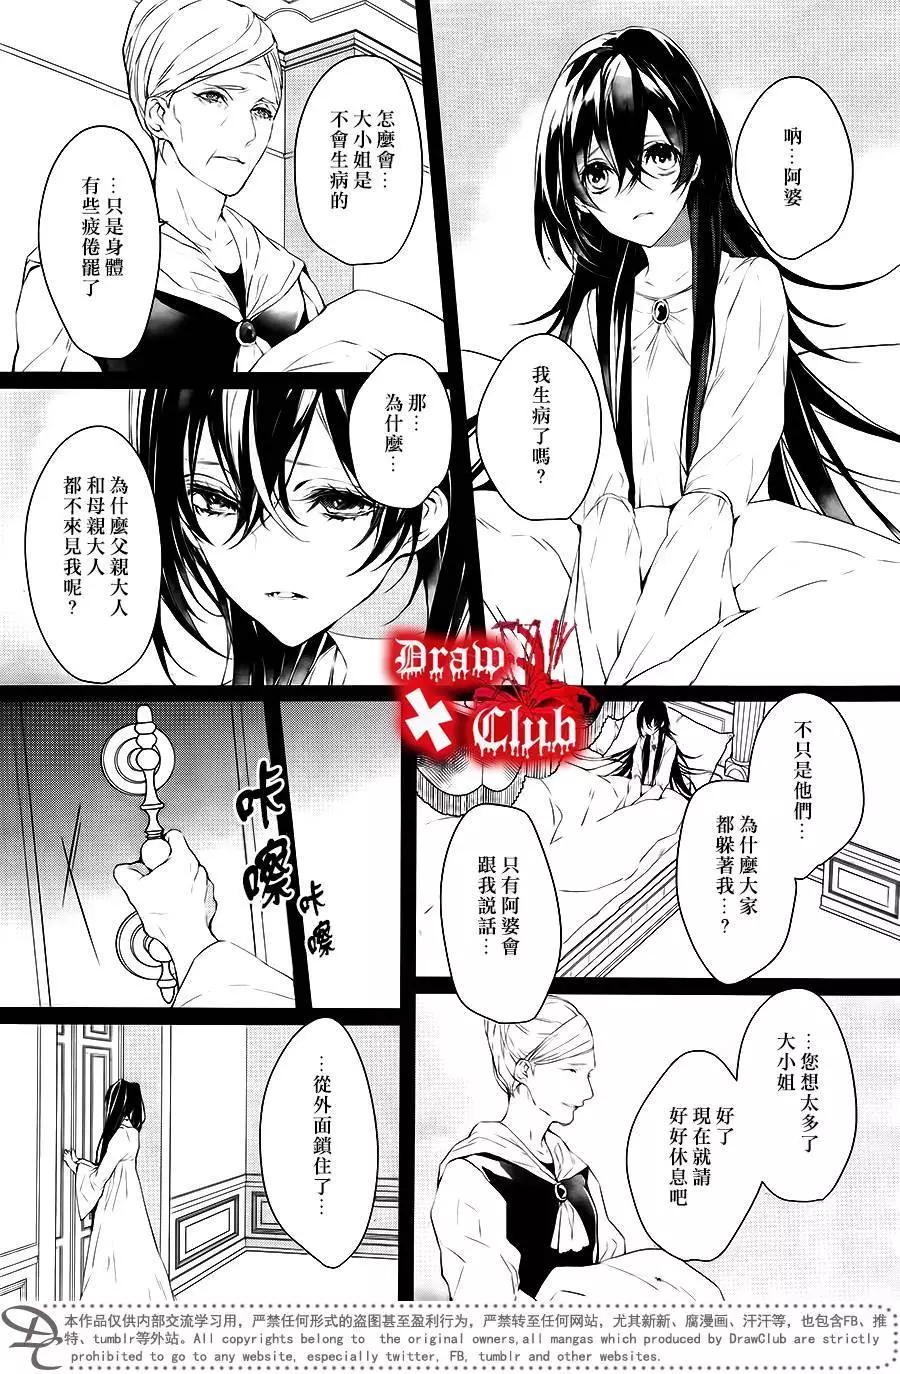 Bloody Mary - 第38回 - 2